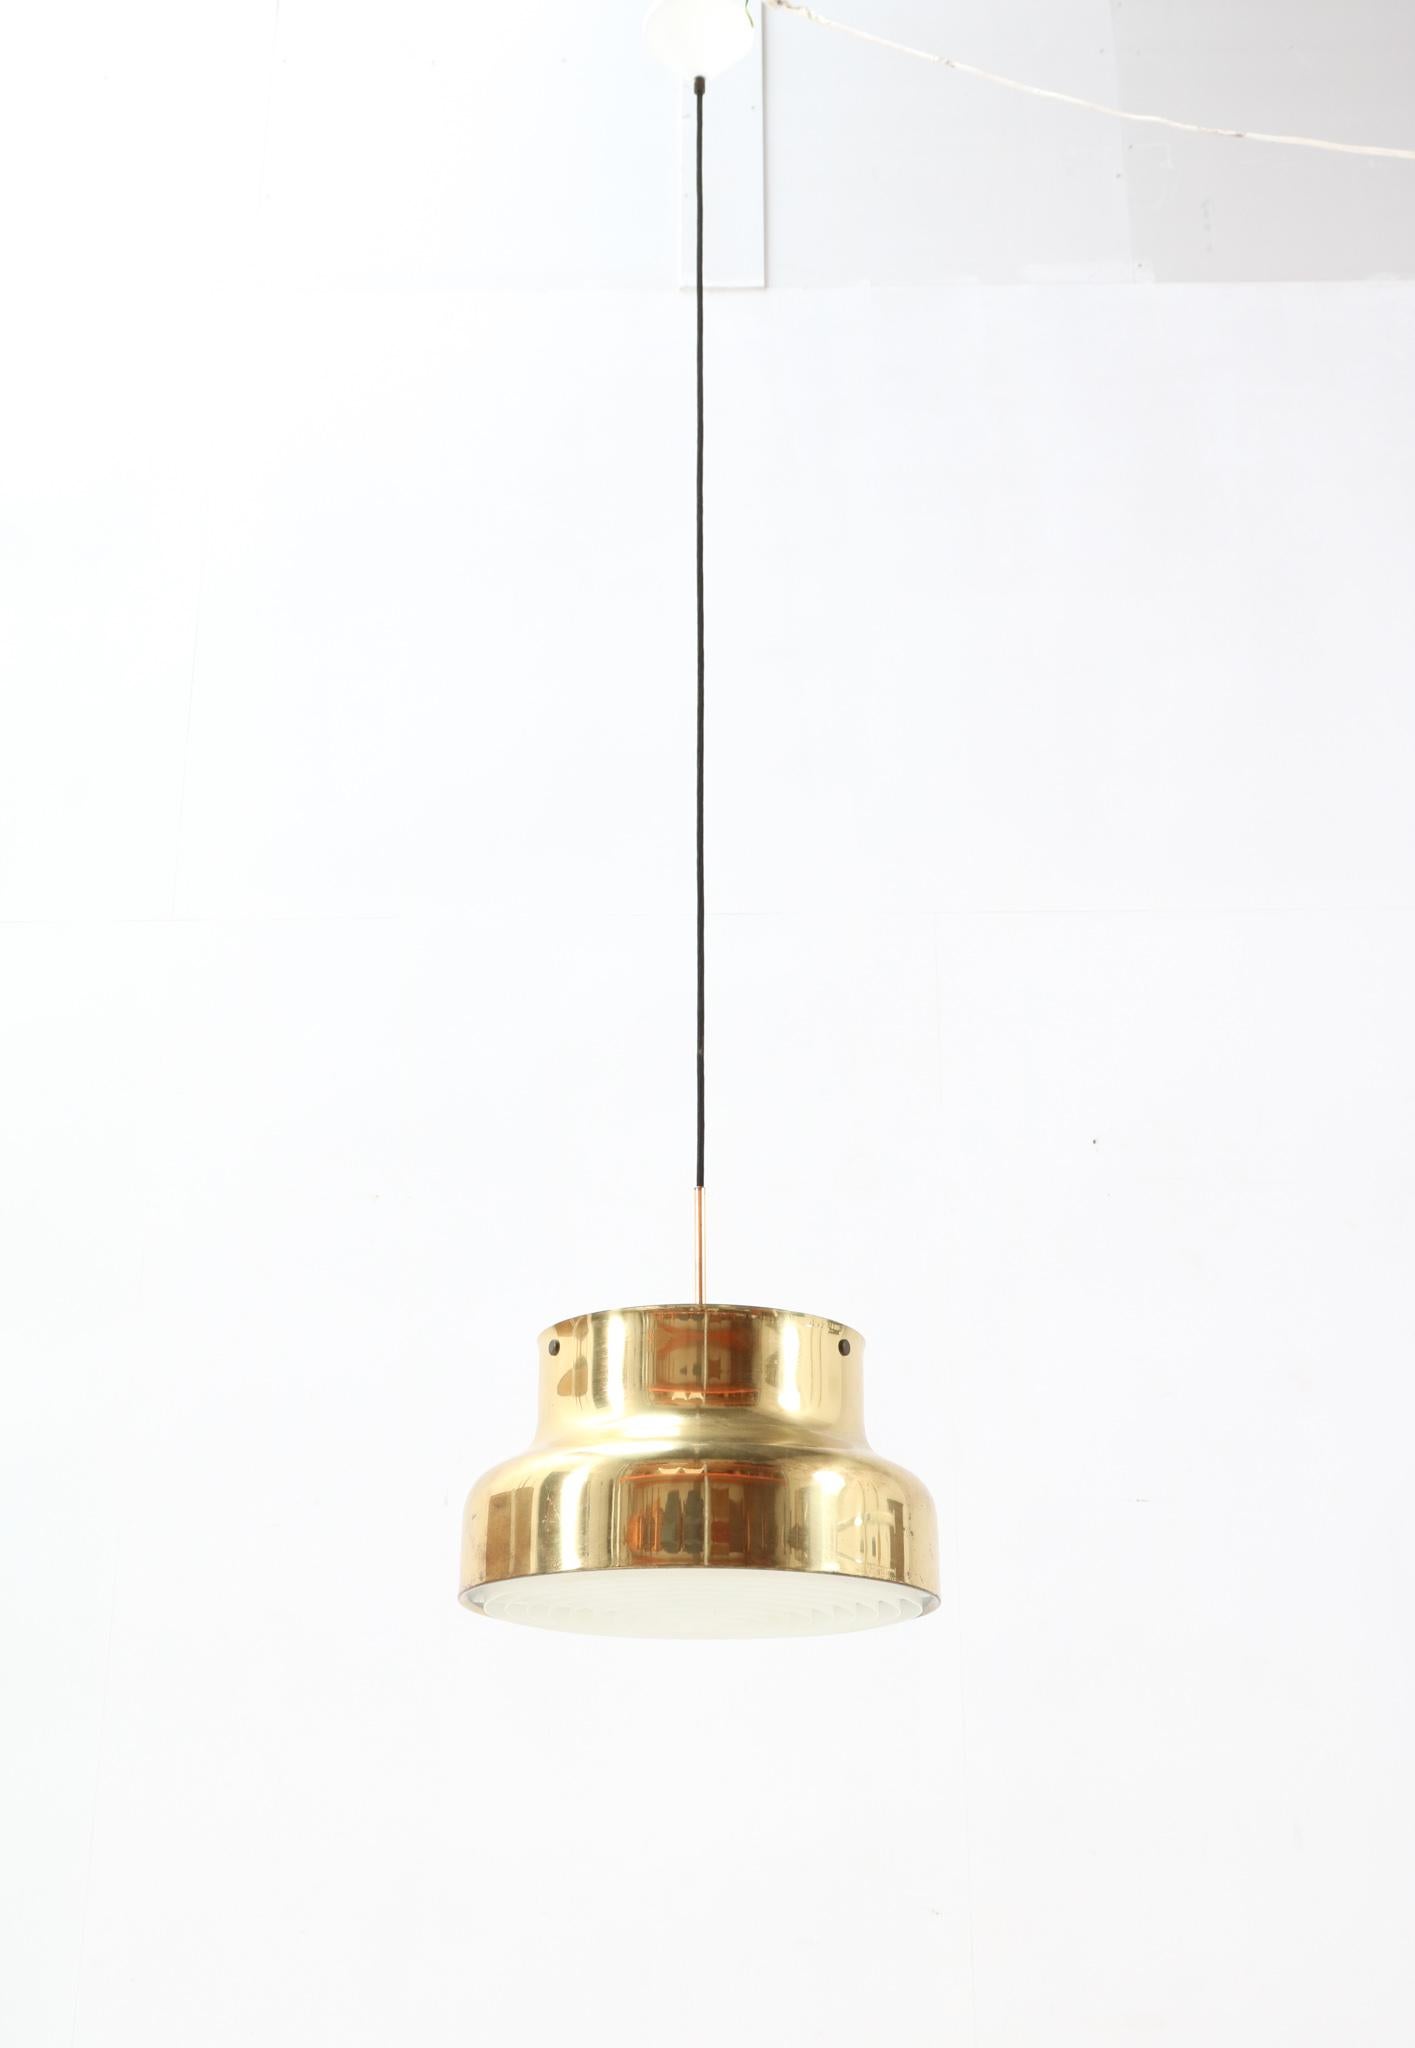 Elegant Mid-Century Modern Bumling pendant light.
Design by Anders Pehrson for Ateljé Lyktan.
Striking Swedish design from the 1960s.
Solid brass shade with the original light-softening acrylic bottom shade.
The original on/off switch is on top